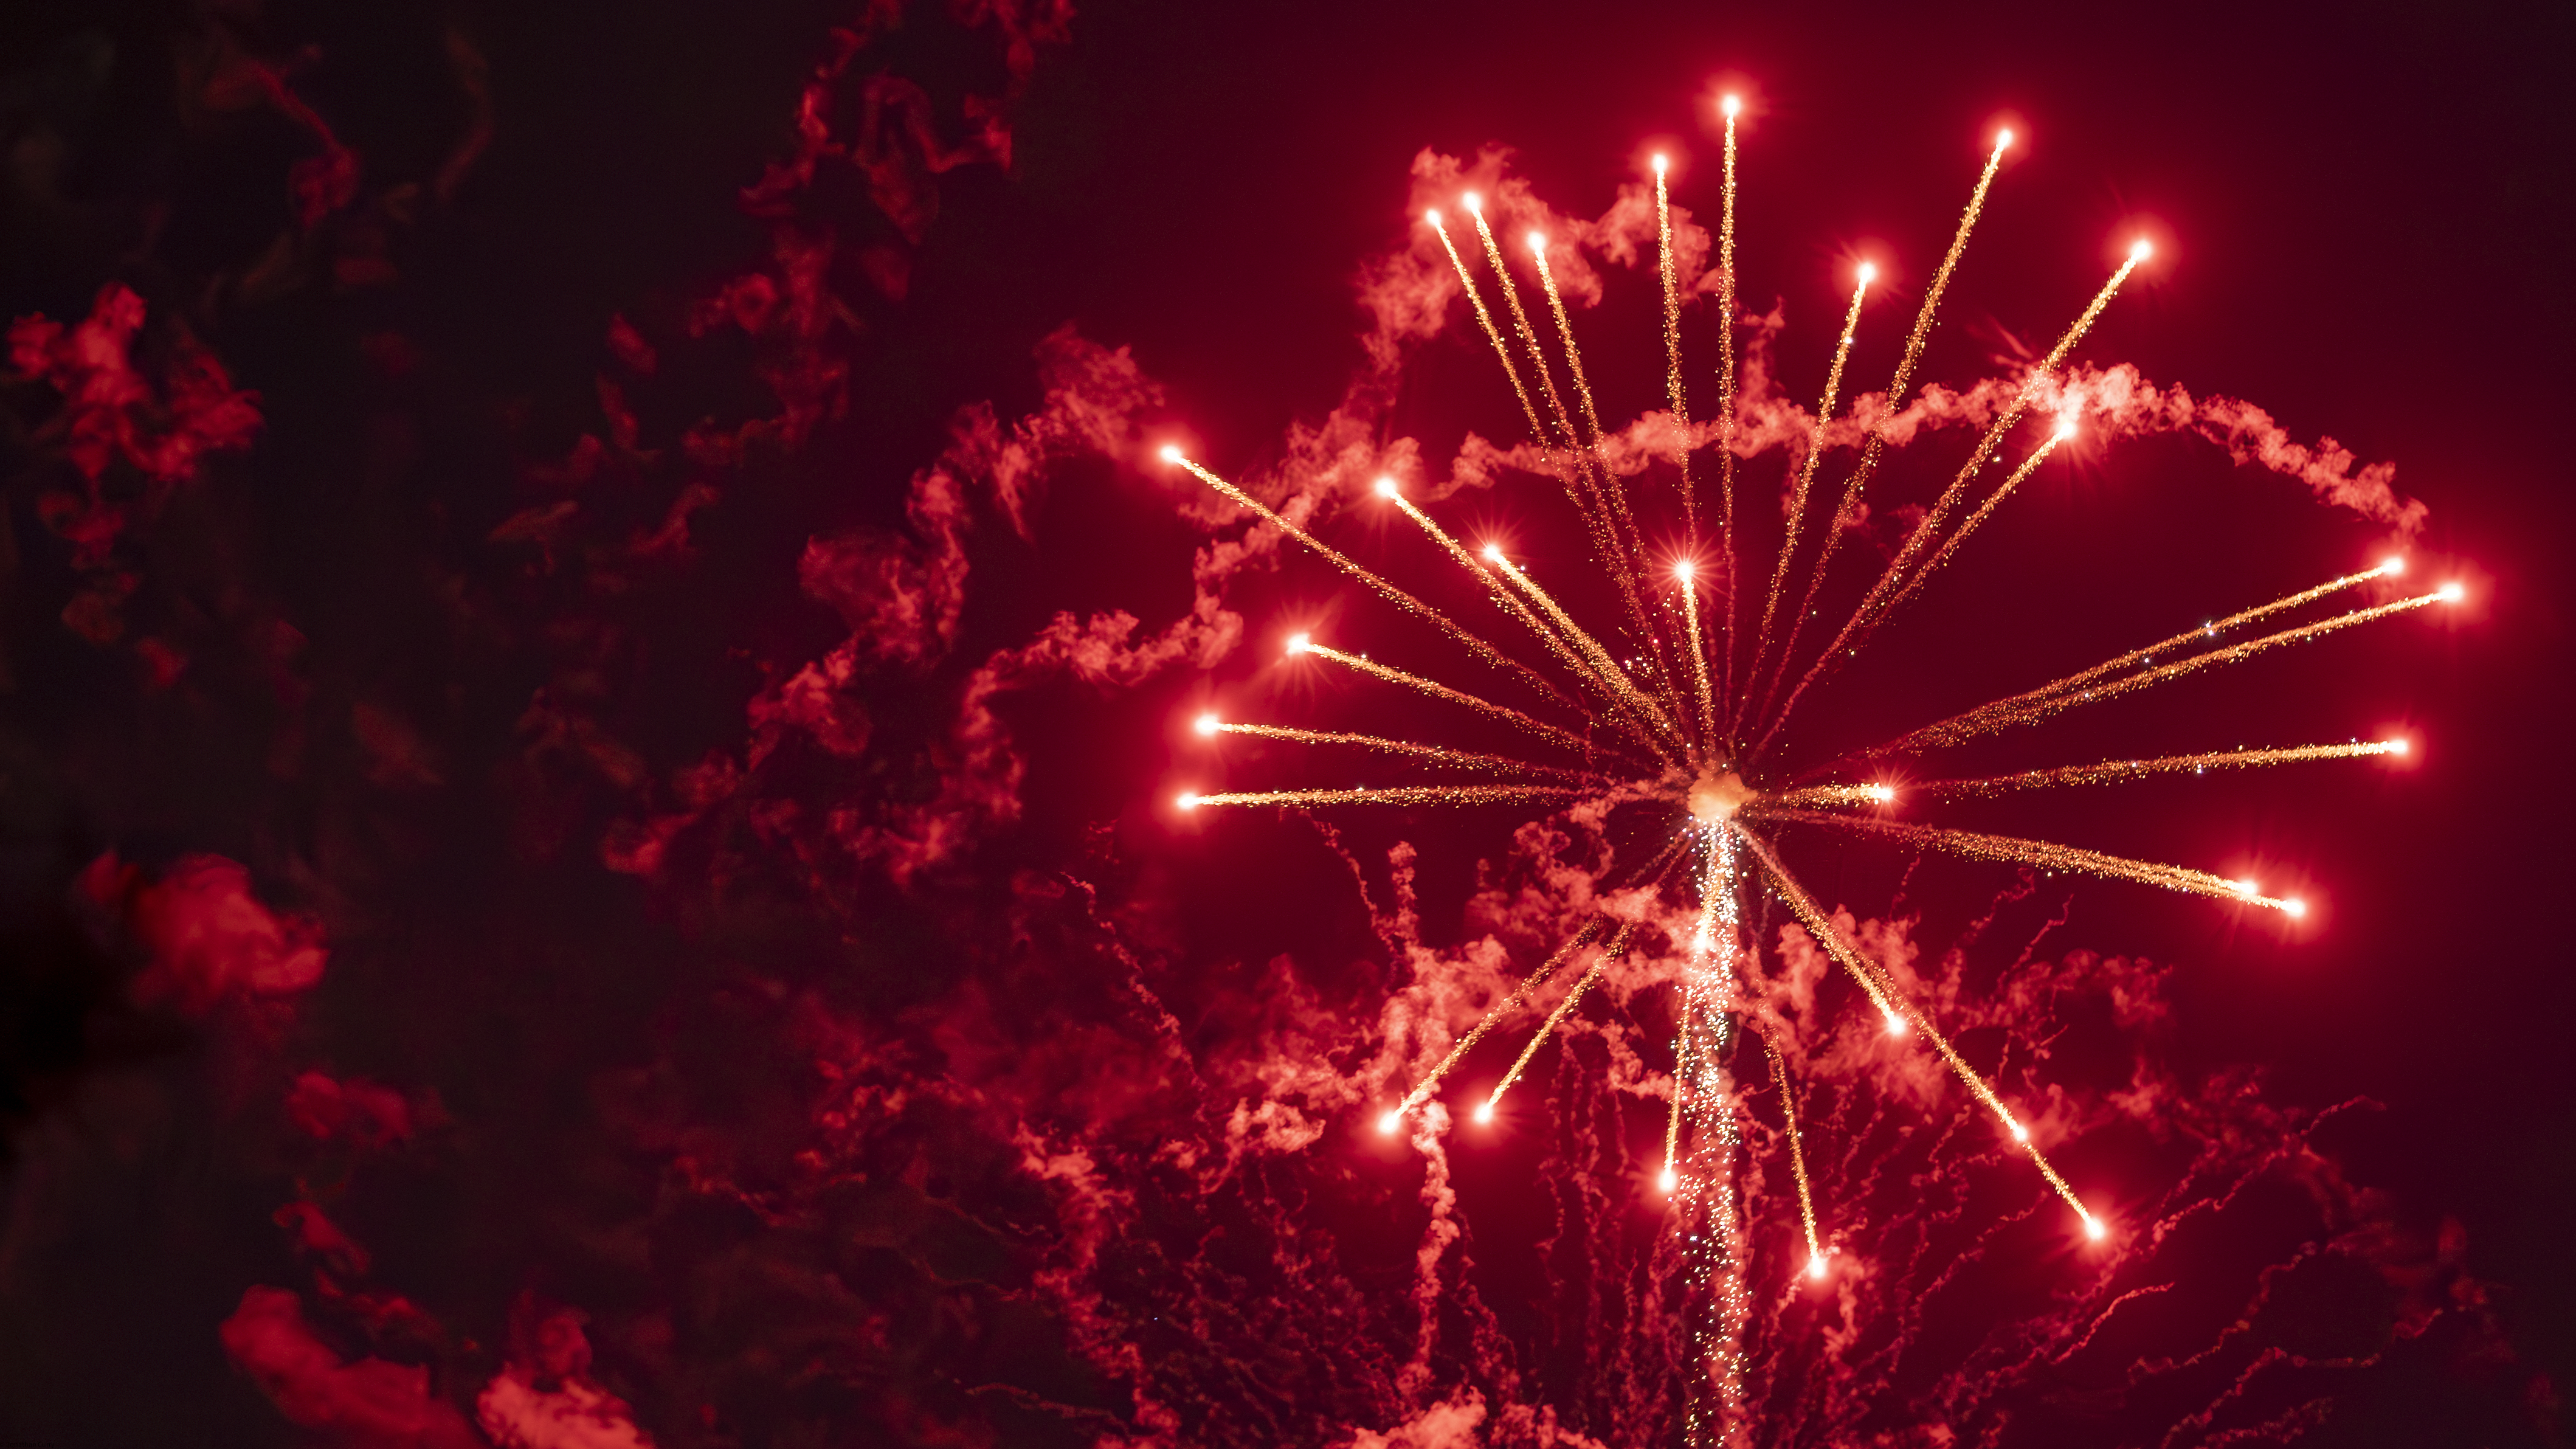 Fireworks Celebrations Fire Sky Smoke Jonathan Curry Photography Outdoors Red Night 4237x2383